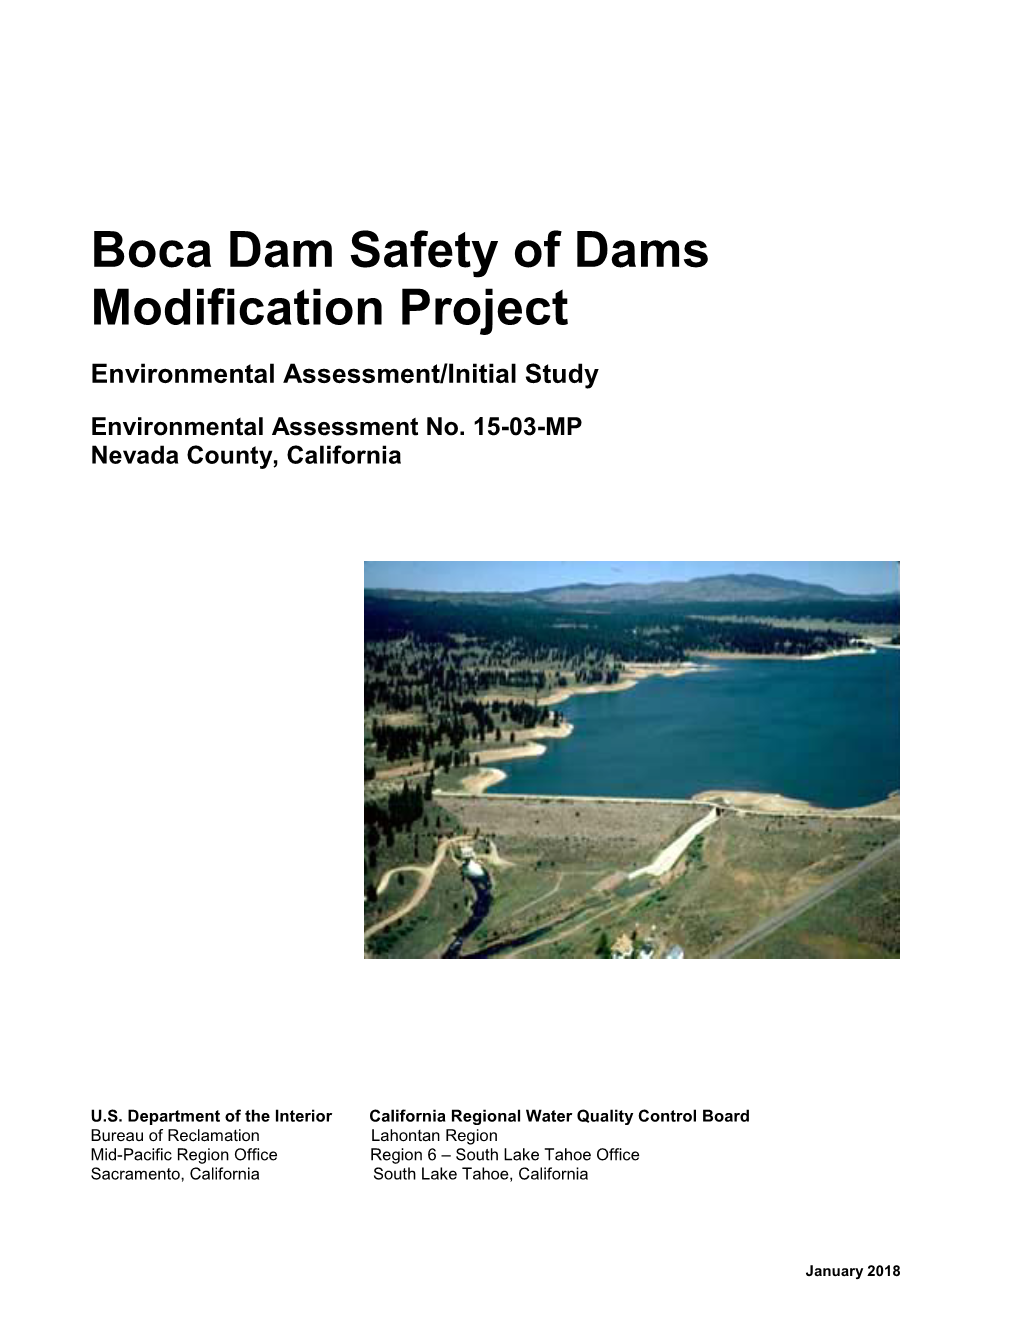 Boca Dam Safety of Dams Modification Project